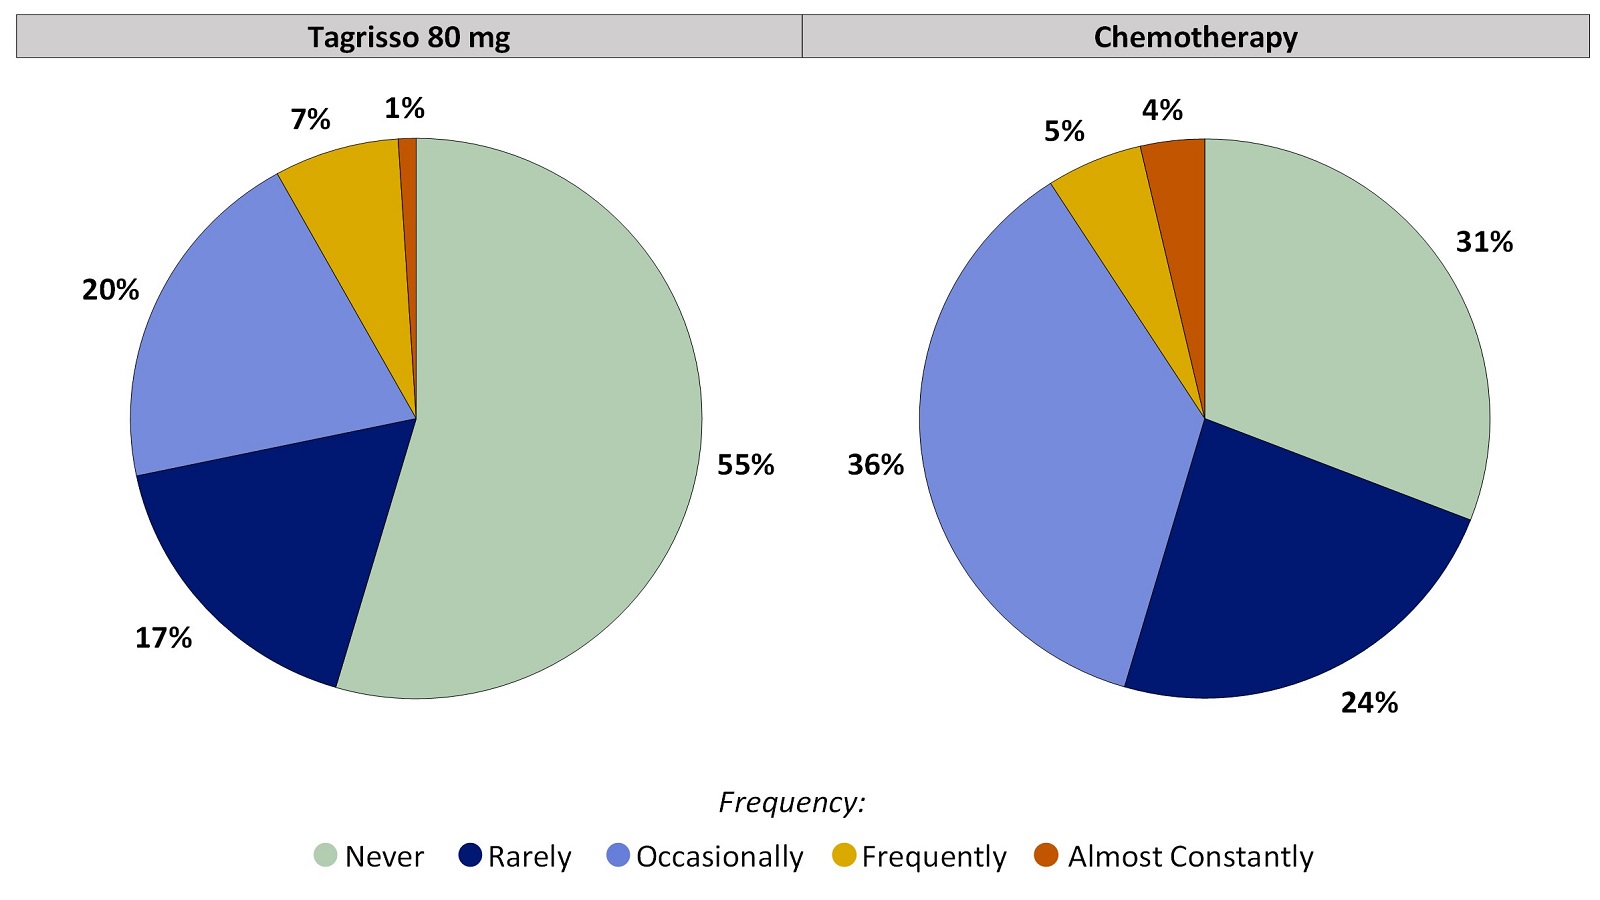 Two pie charts, one for Tagrisso and the other for chemotherapy, summarizing the percentage of patients by worst reported chills during the first 24 weeks of the clinical trial. In the Tagrisso arm, Never (55%), Rarely (17%), Occasionally (20%), Frequently (7%) and Almost constantly (1%). In the chemotherapy arm, Never (31%), Rarely (24%), Occasionally (36%), Frequently (5%) and Almost constantly (4%).